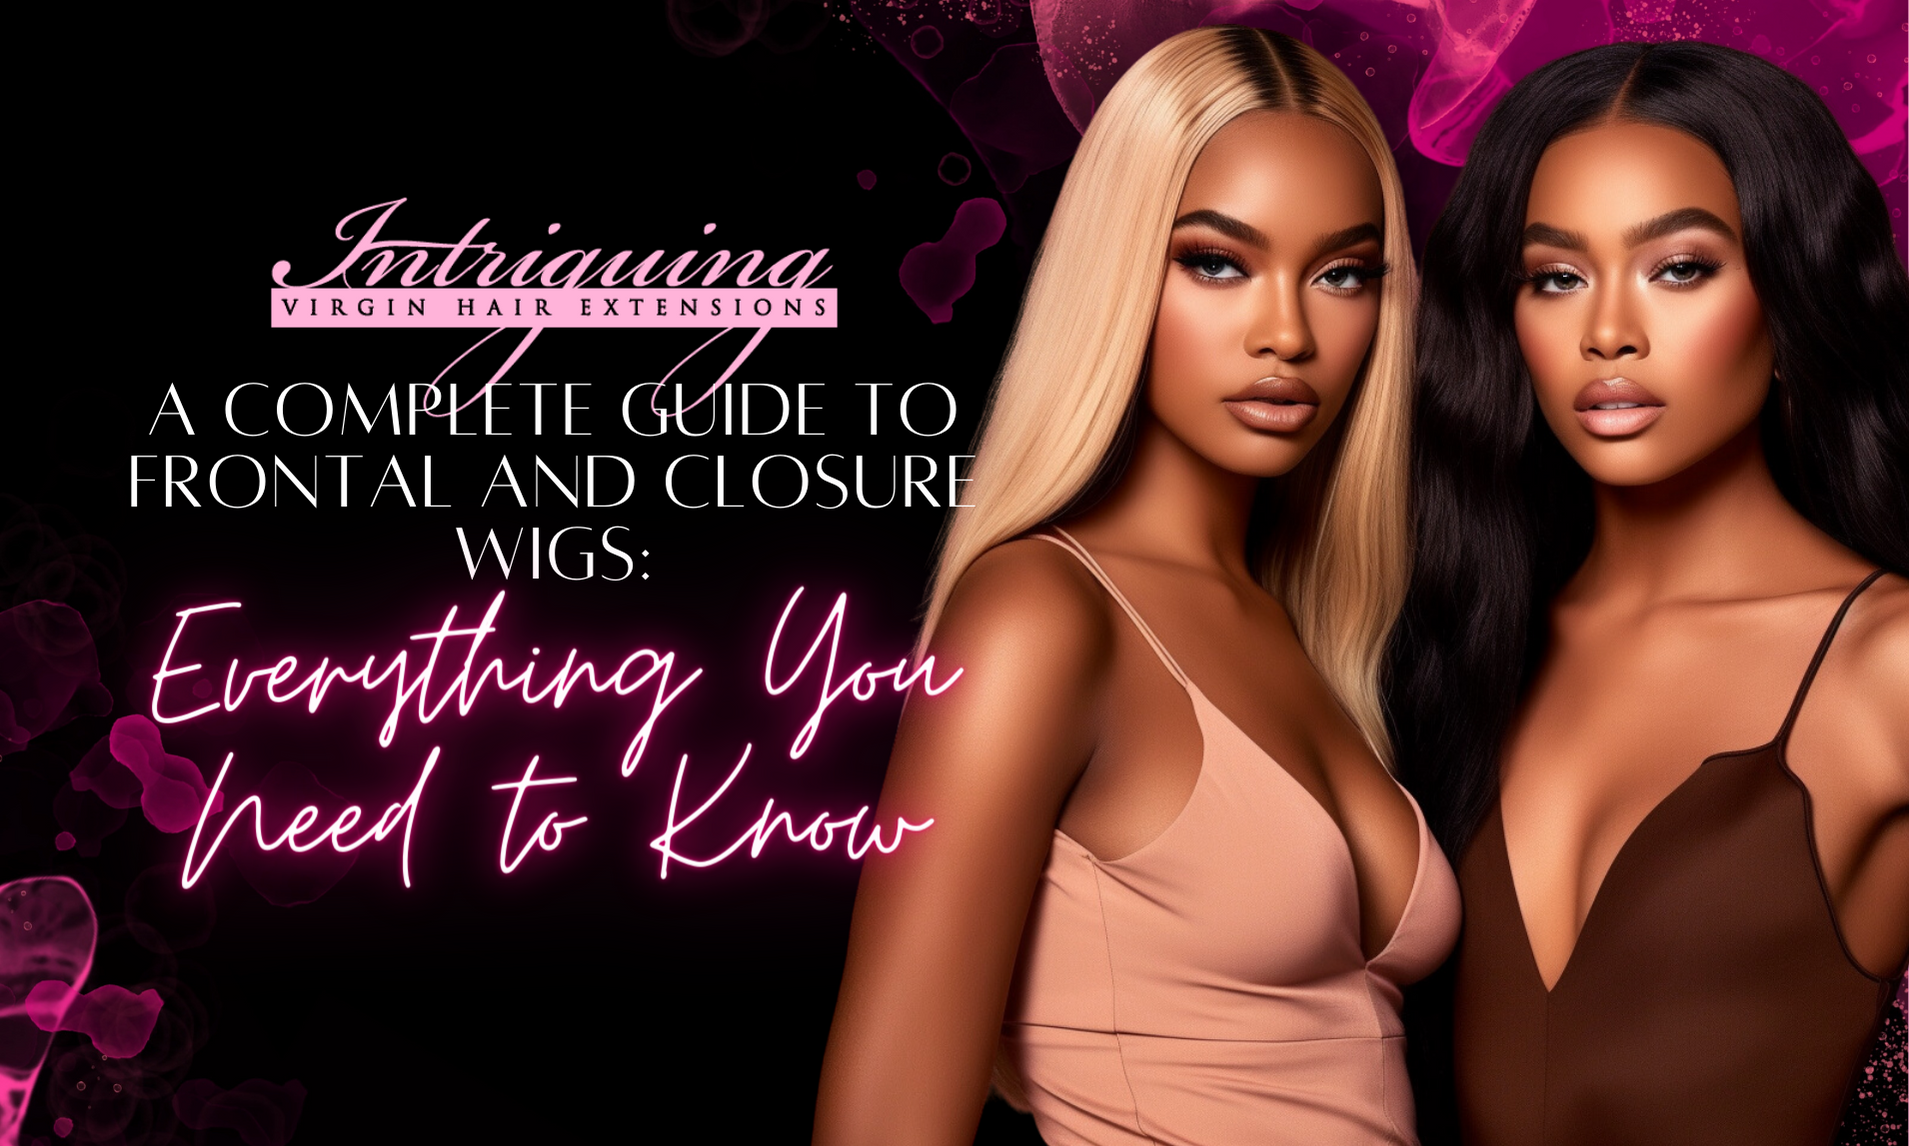 A Complete Guide to Frontal and Closure Wigs: Everything You Need to Know